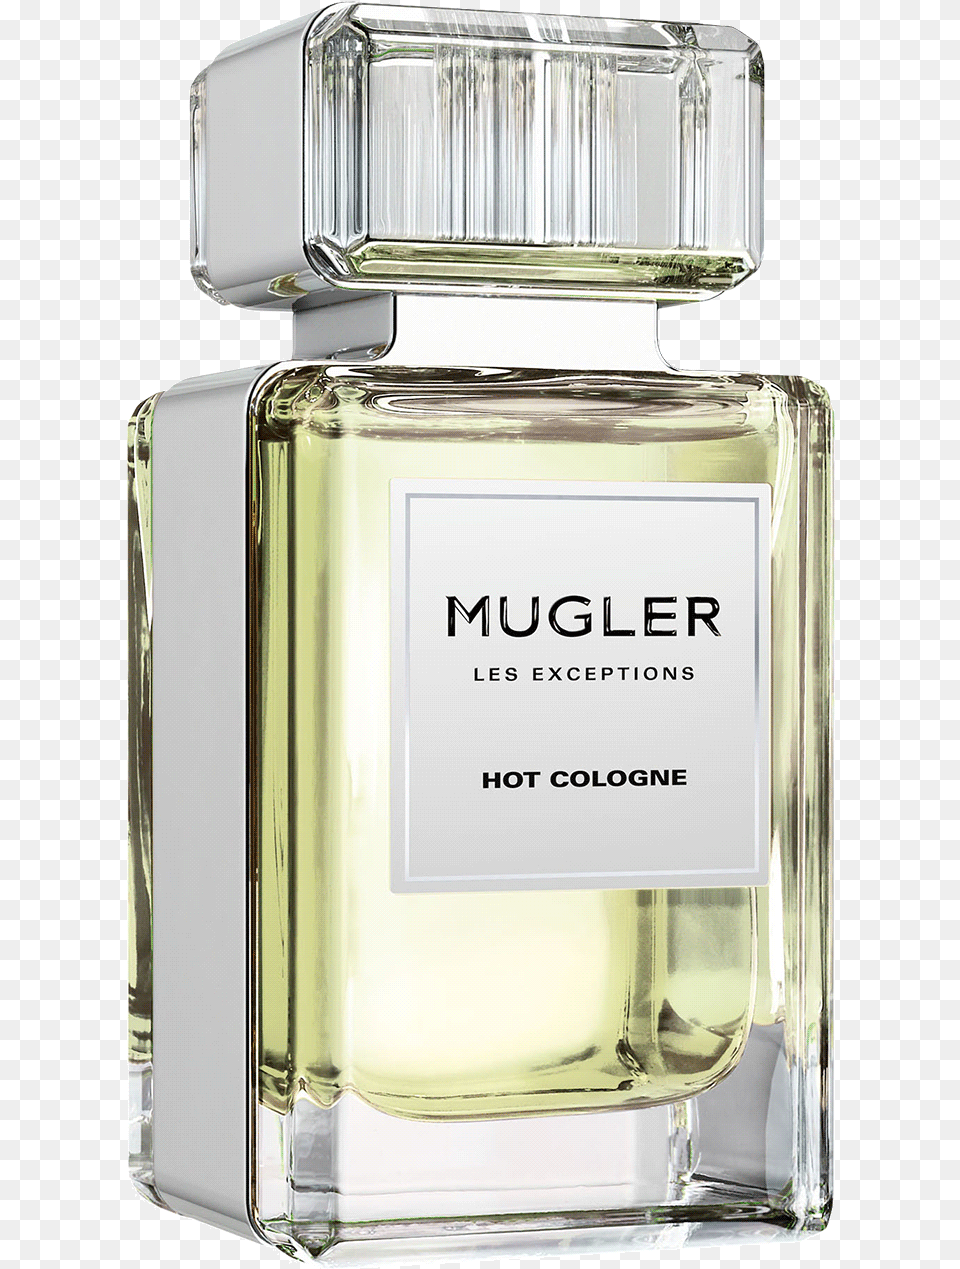 Les Exceptions Hot Cologne Mugler Perfume Les Exceptions, Bottle, Cosmetics Png Image